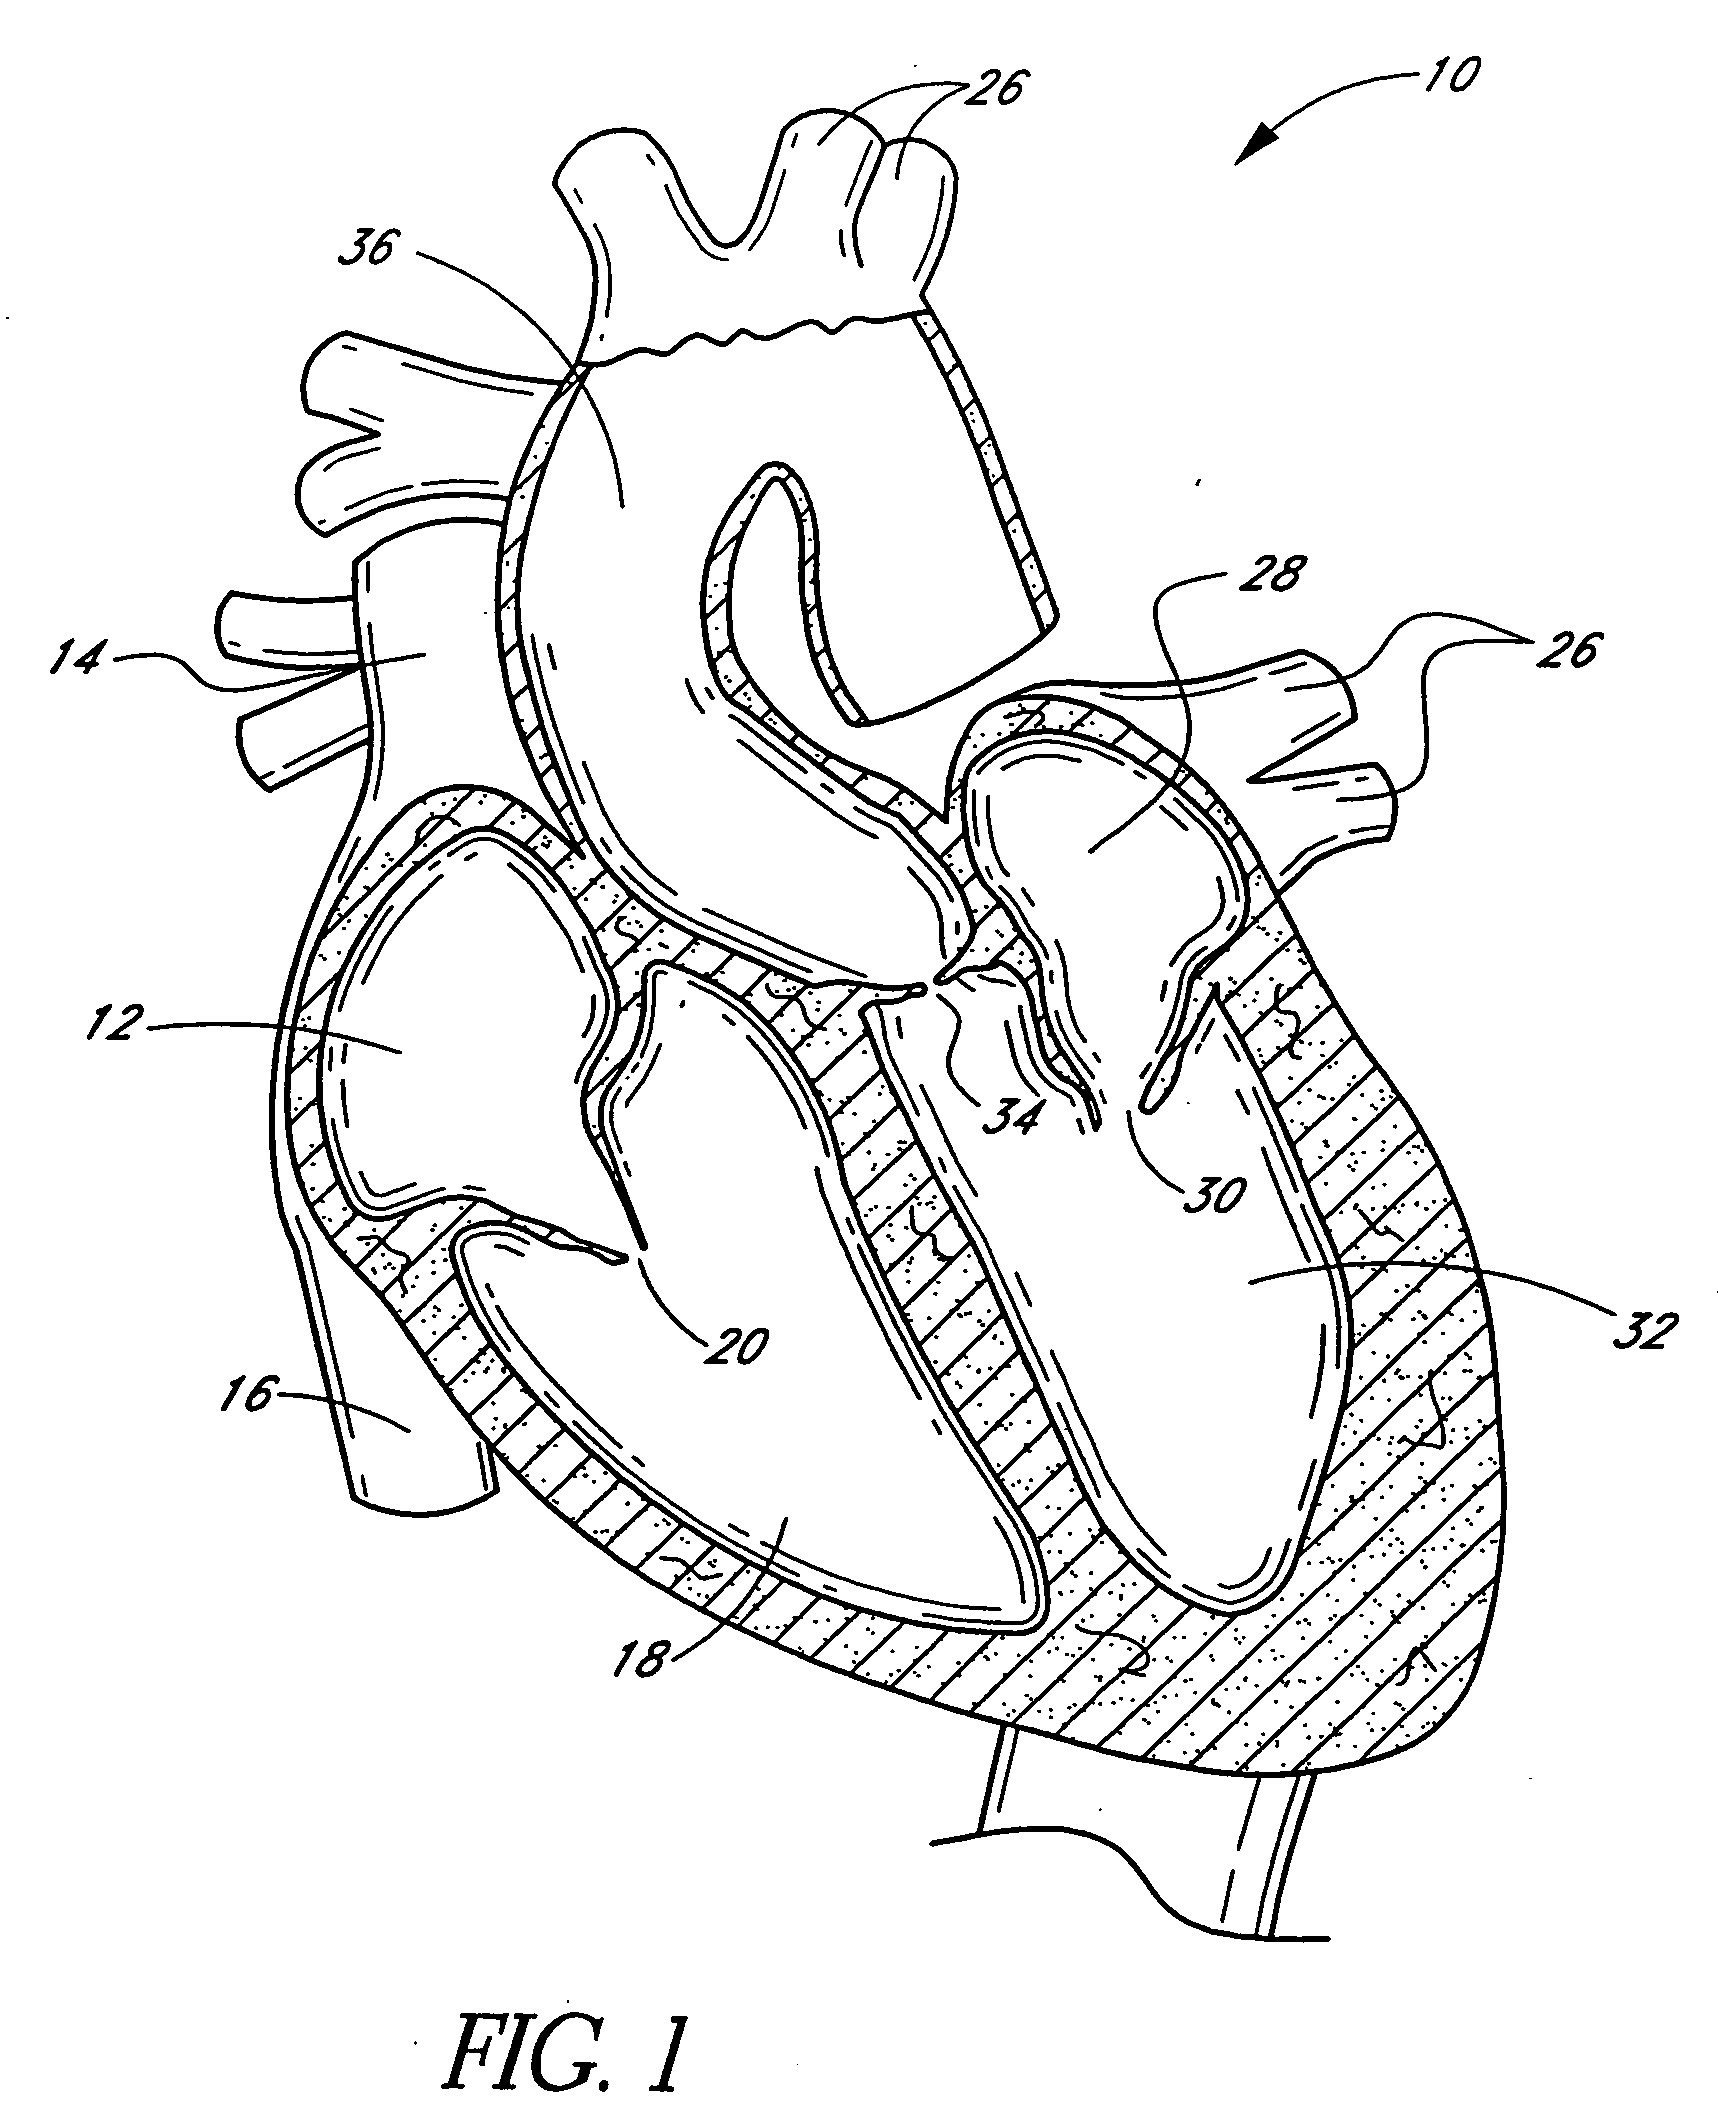 Methods of cardiac valve replacement using nonstented prosthetic valve